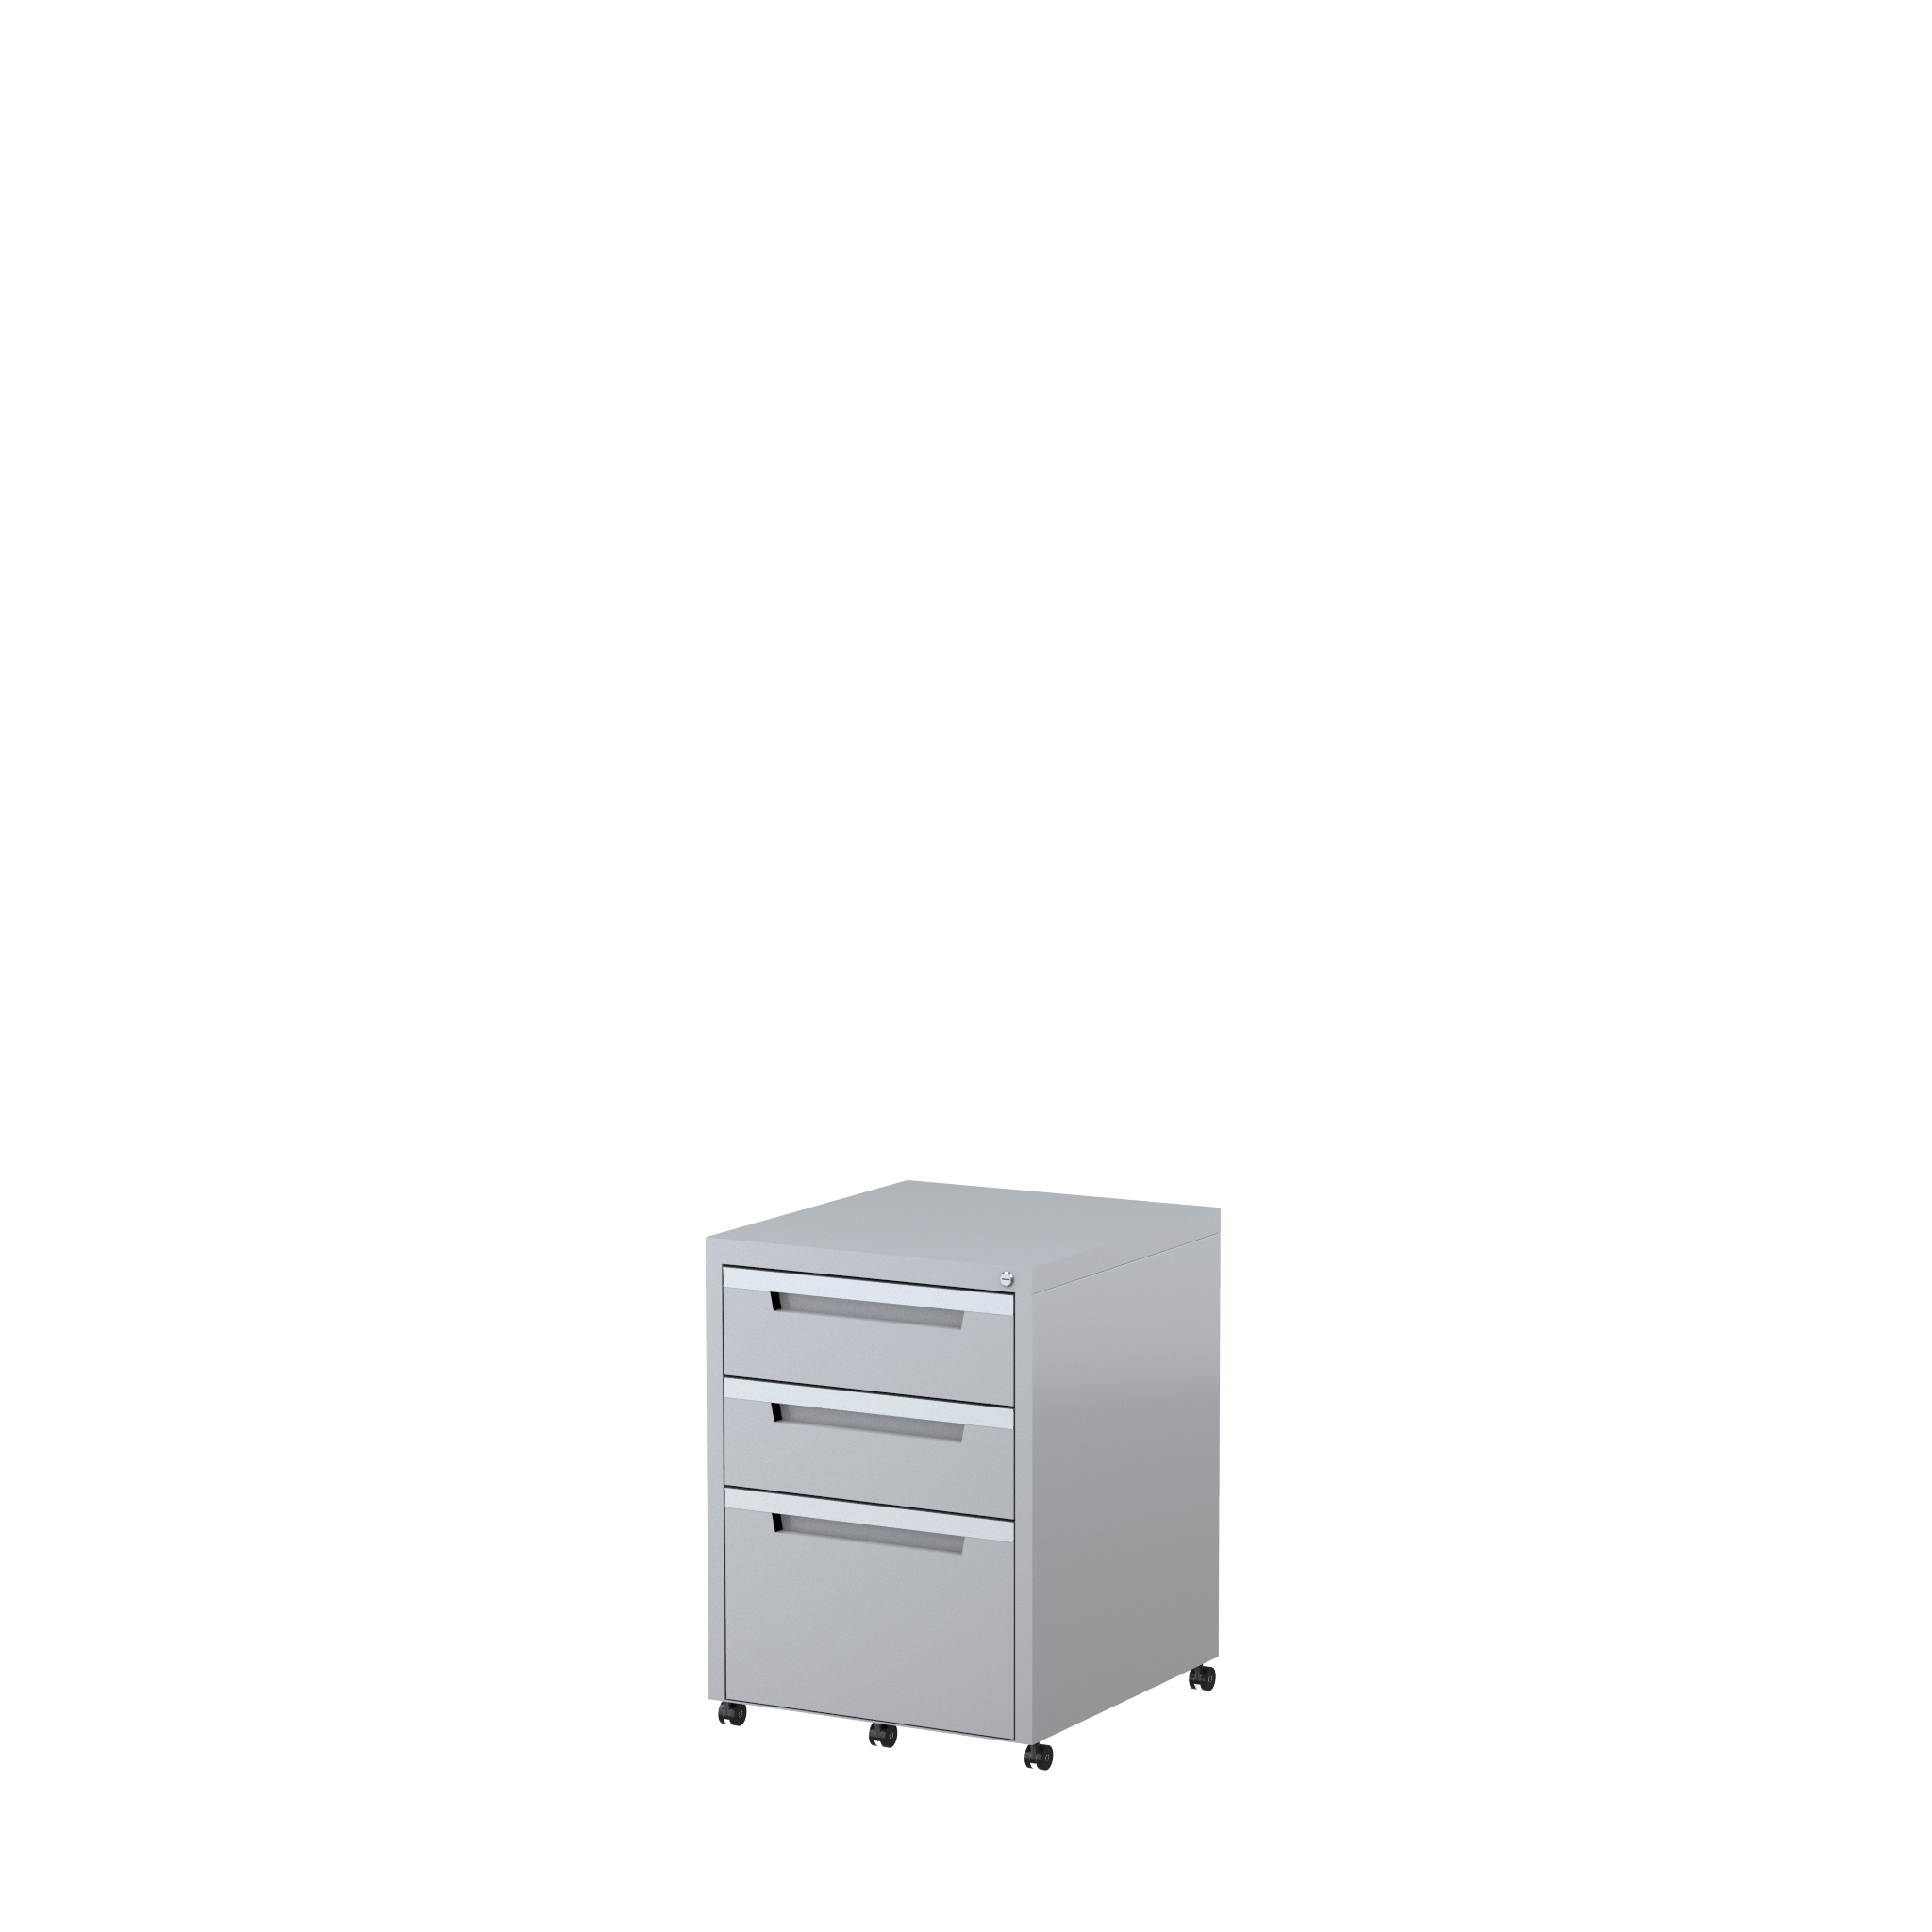 MP2B1F - STEELCO Mobile Pedestal BBF 630H x 470W x 515D-SG.png